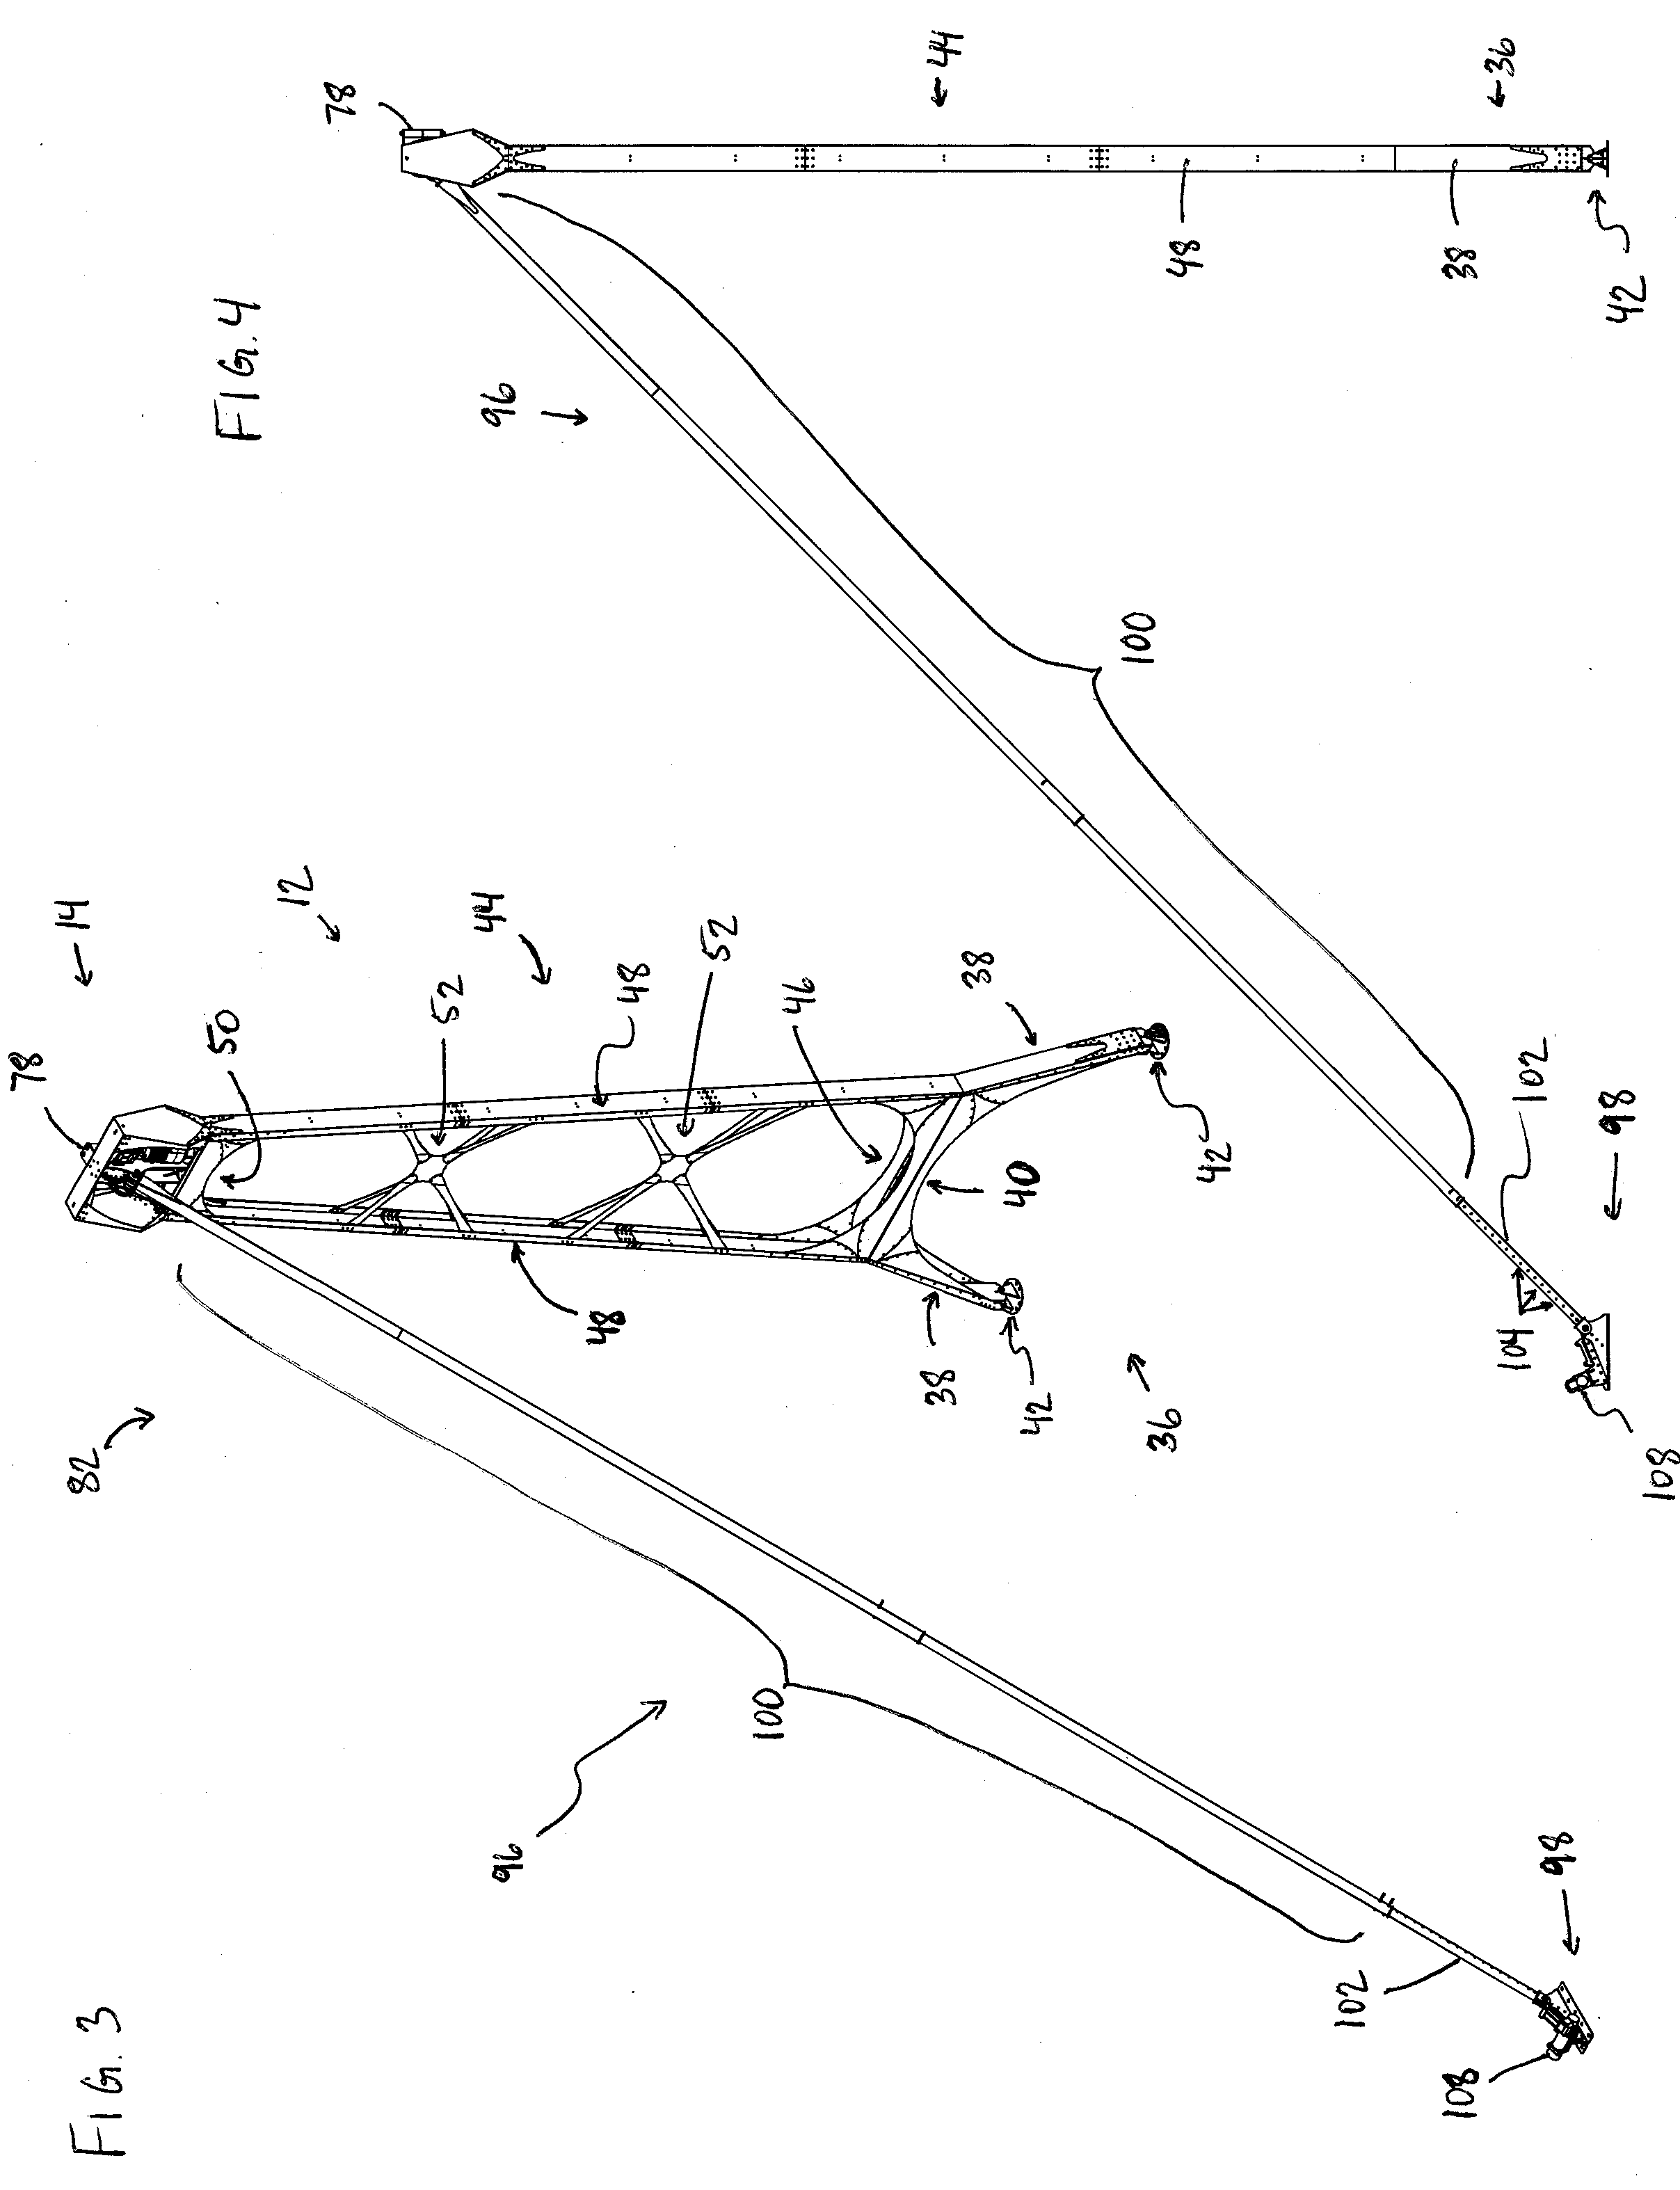 Rigid Tensioning Member and Tension Measuring Device for a Towing System for Towing a User on a Support Material